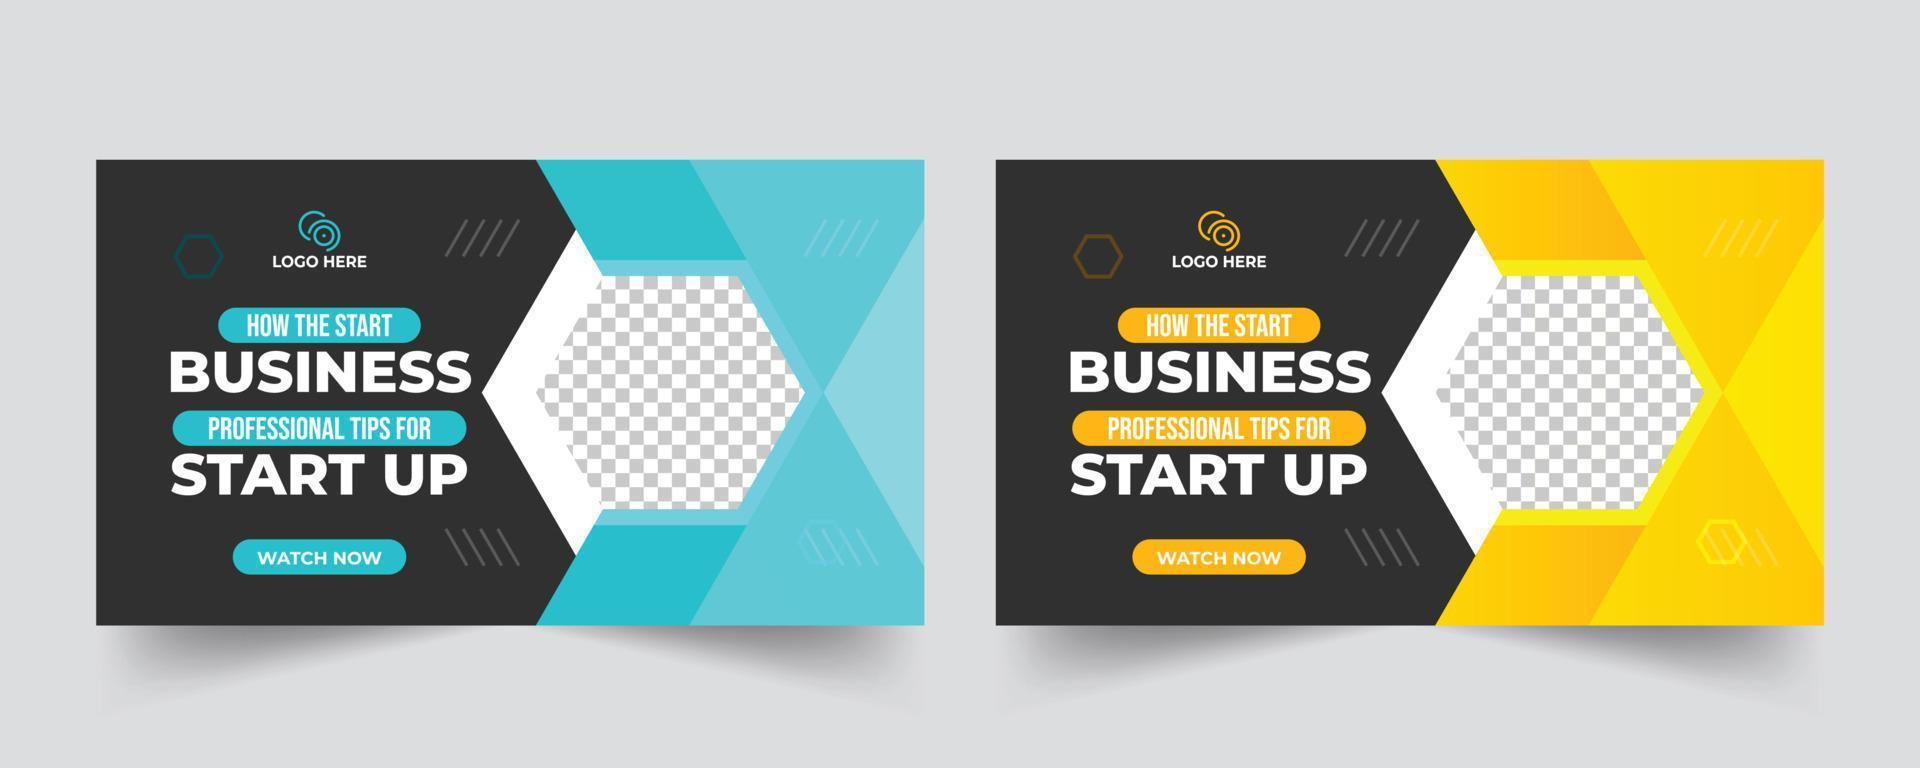 Business web banner template and social media thumbnail design template vector